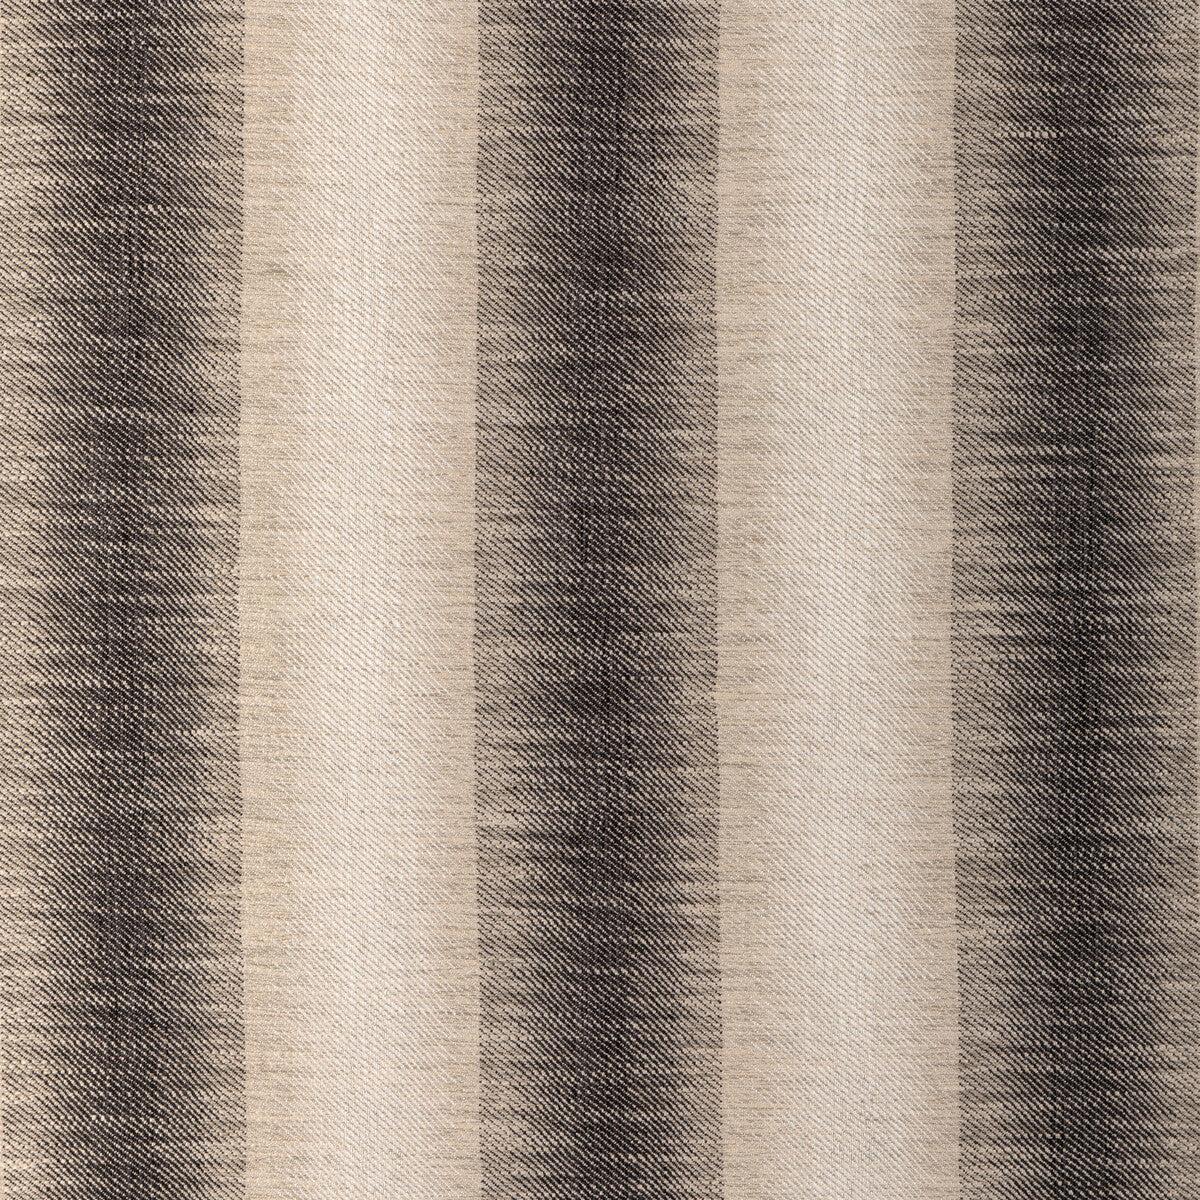 Kravet Design fabric in 37118-8 color - pattern 37118.8.0 - by Kravet Design in the Woven Colors collection